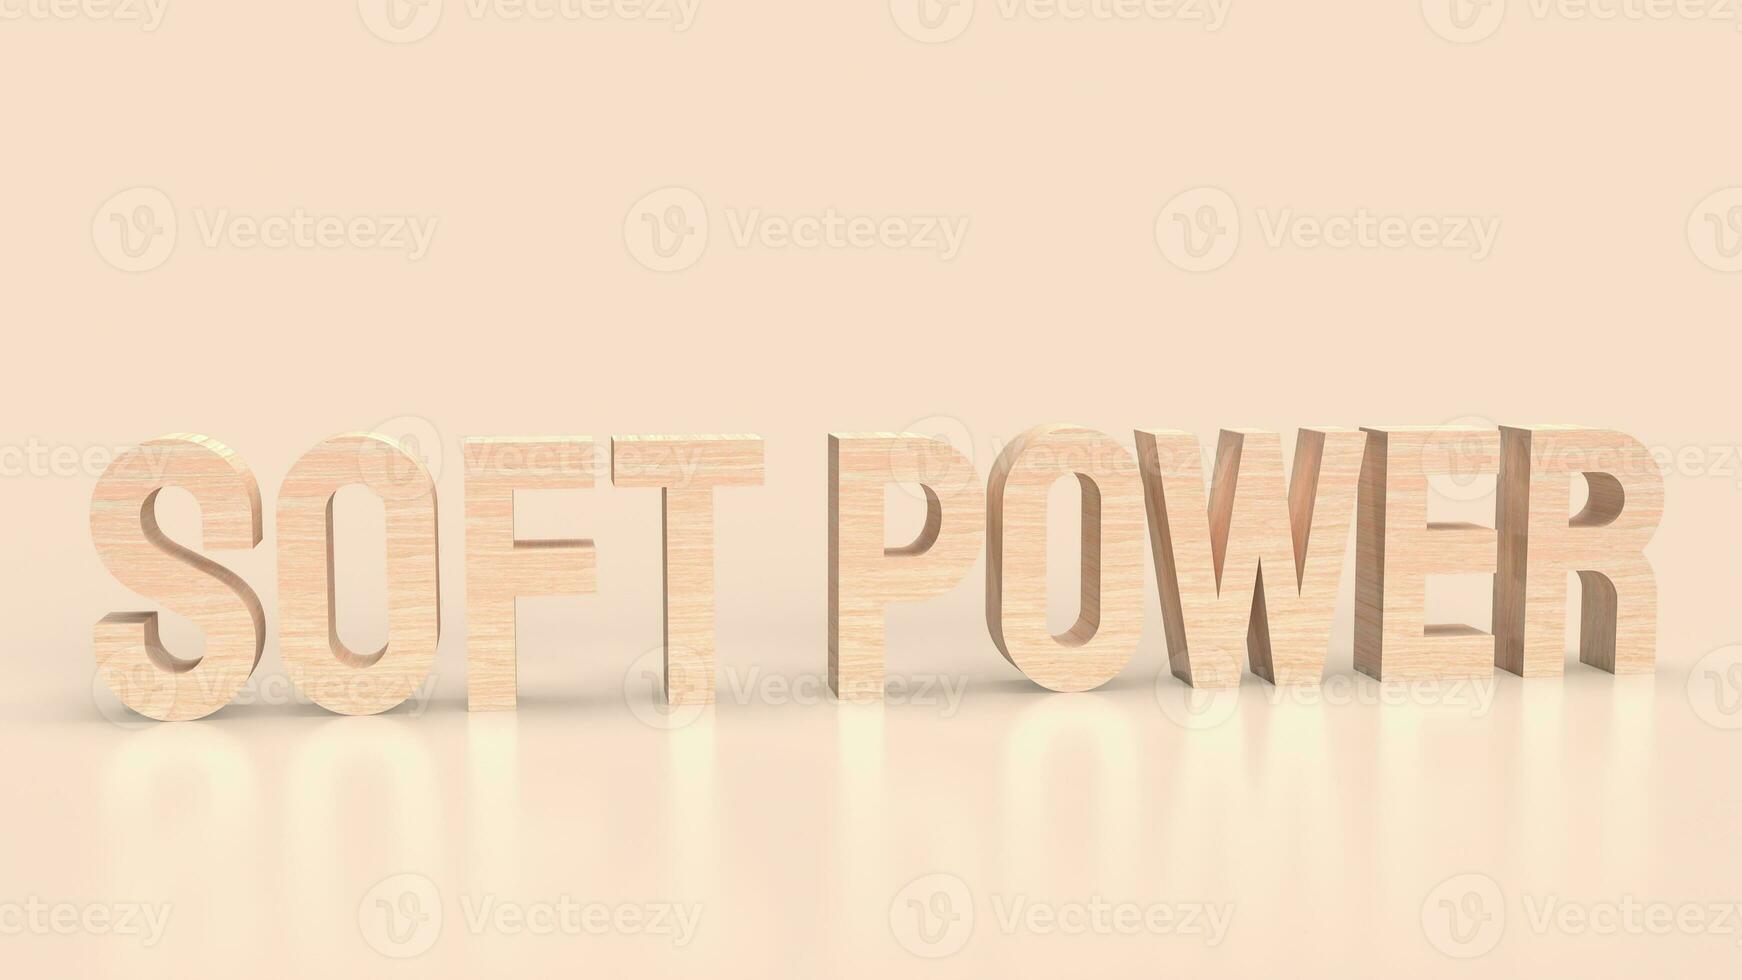 The soft power text for ntity to influence others concept 3d rendering photo